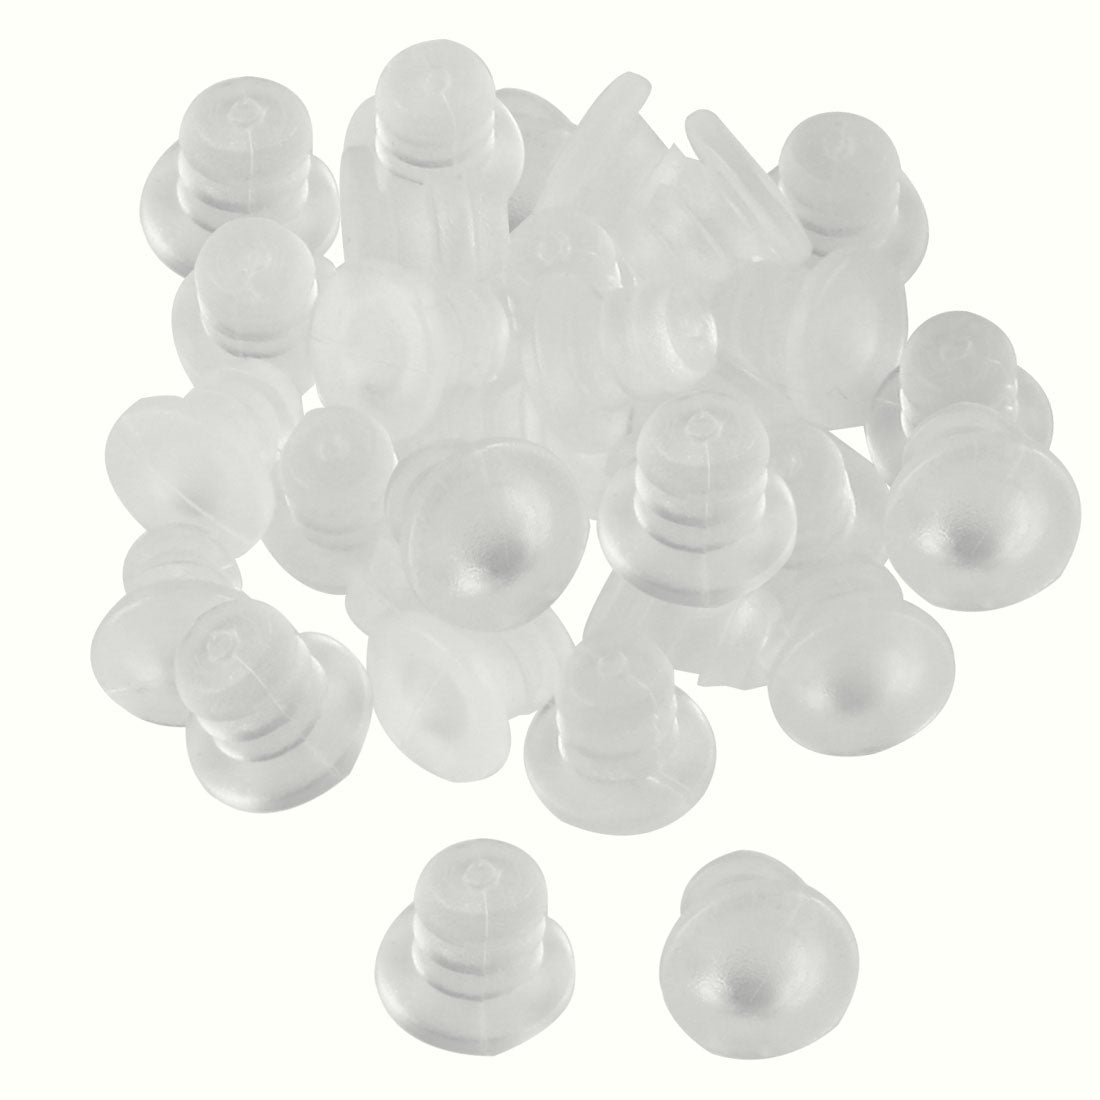 uxcell Uxcell 32pcs 5mm Soft Clear Stem Bumpers Glide, Patio Outdoor Furniture Glass Table Top Anti-collision Embedded